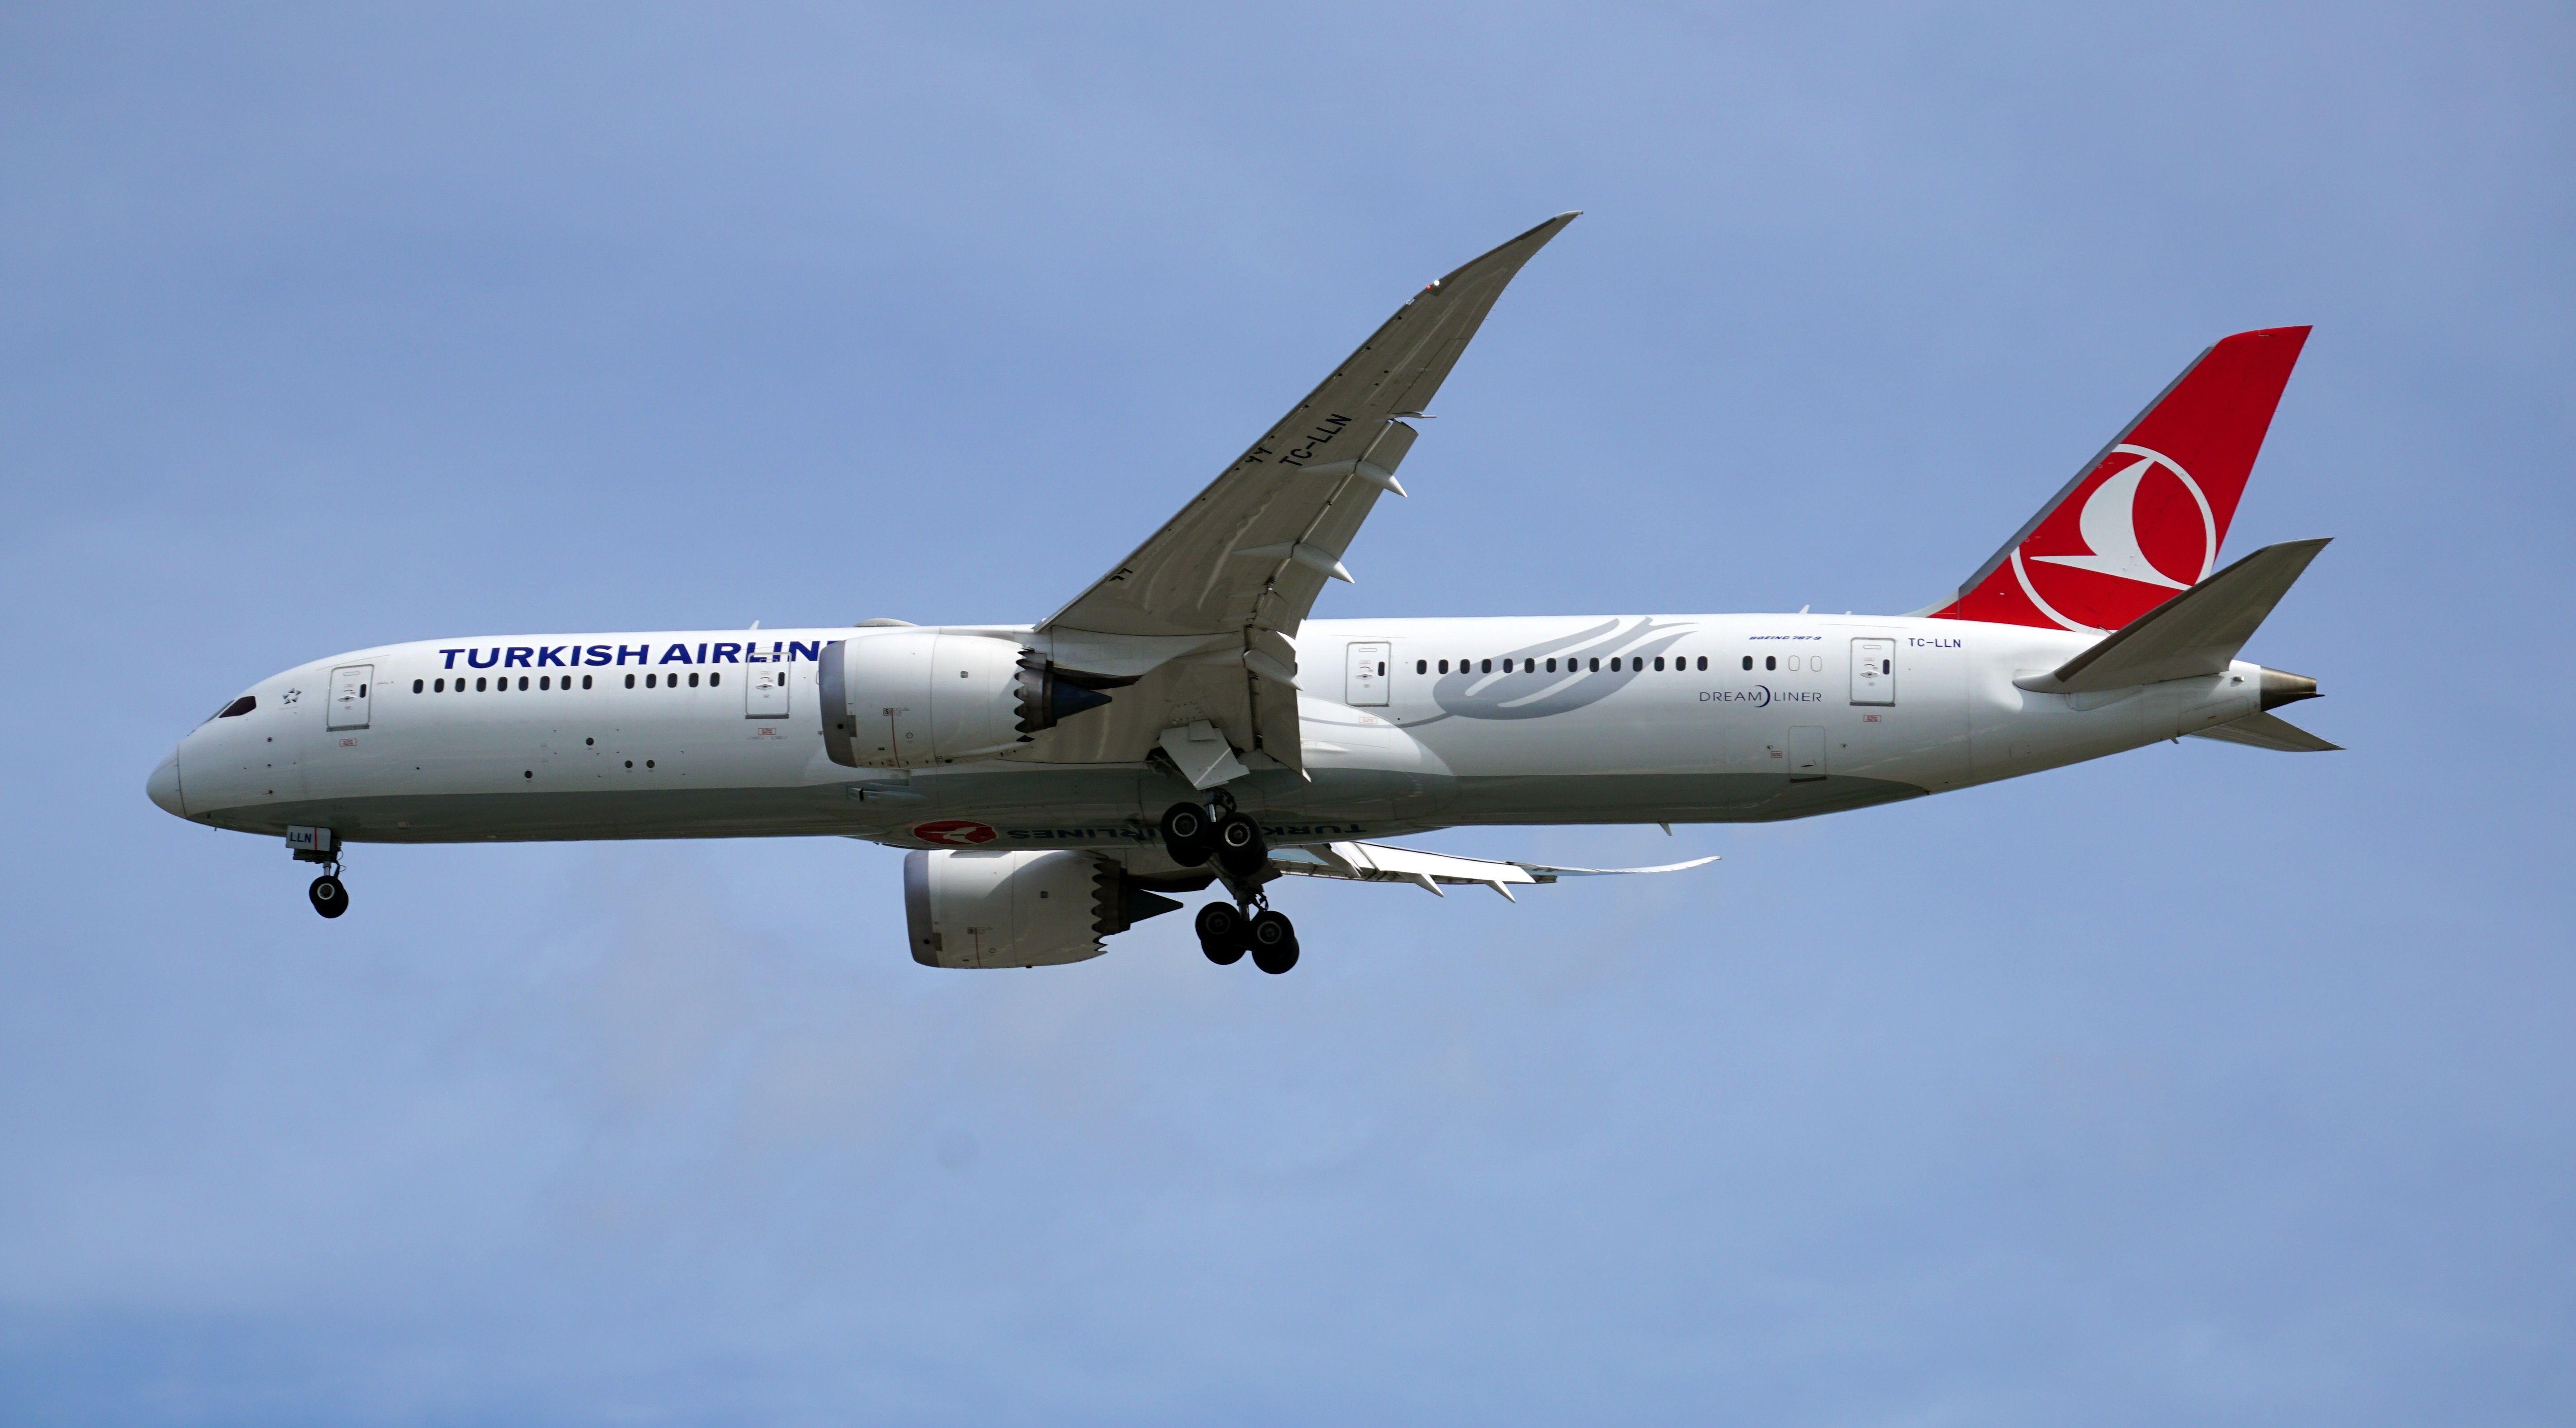 A Turkish Airlines Boeing 787-9 flying in the sky.